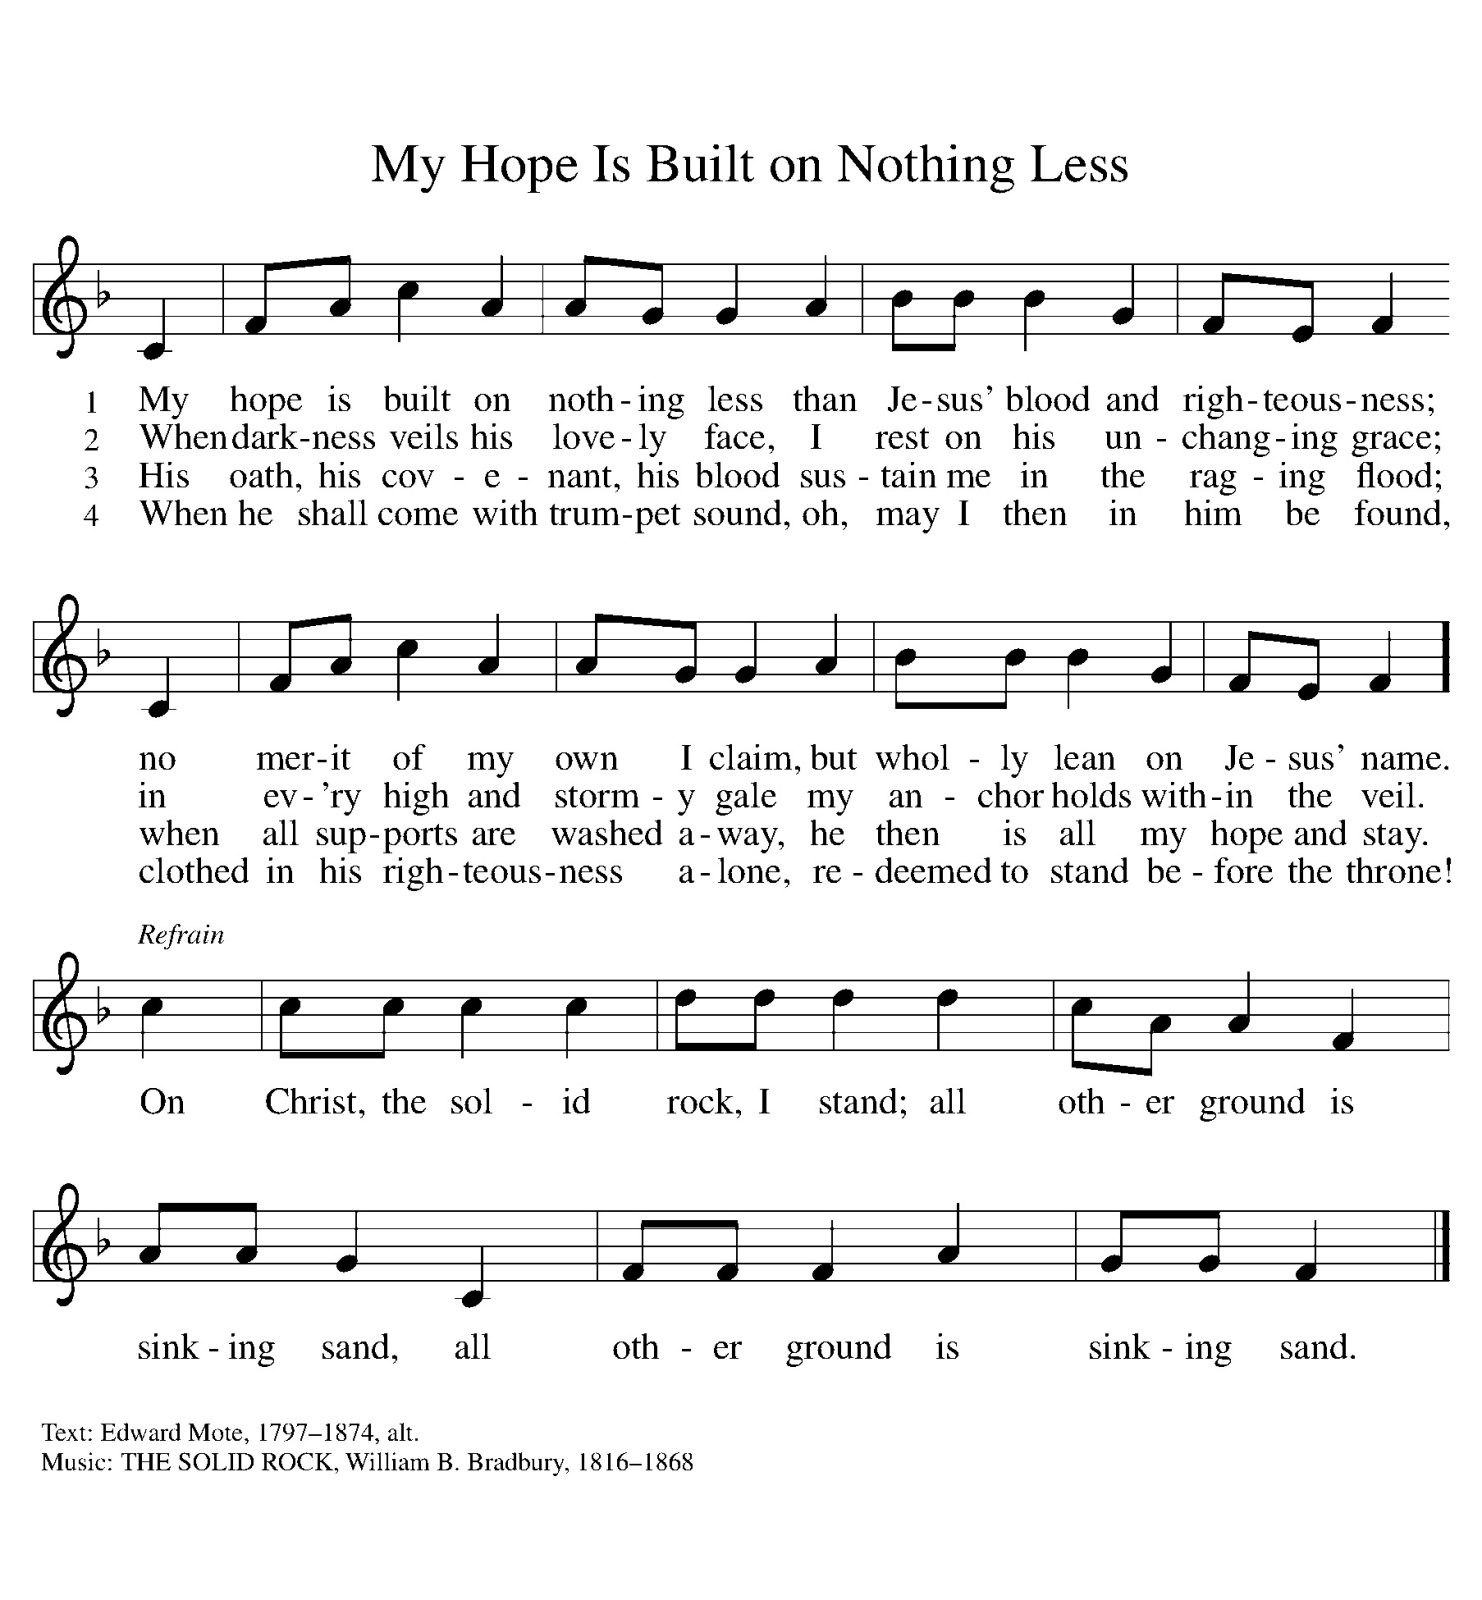 My Hope Is Built on Nothing Less (THE SOLID ROCK) (Melody)